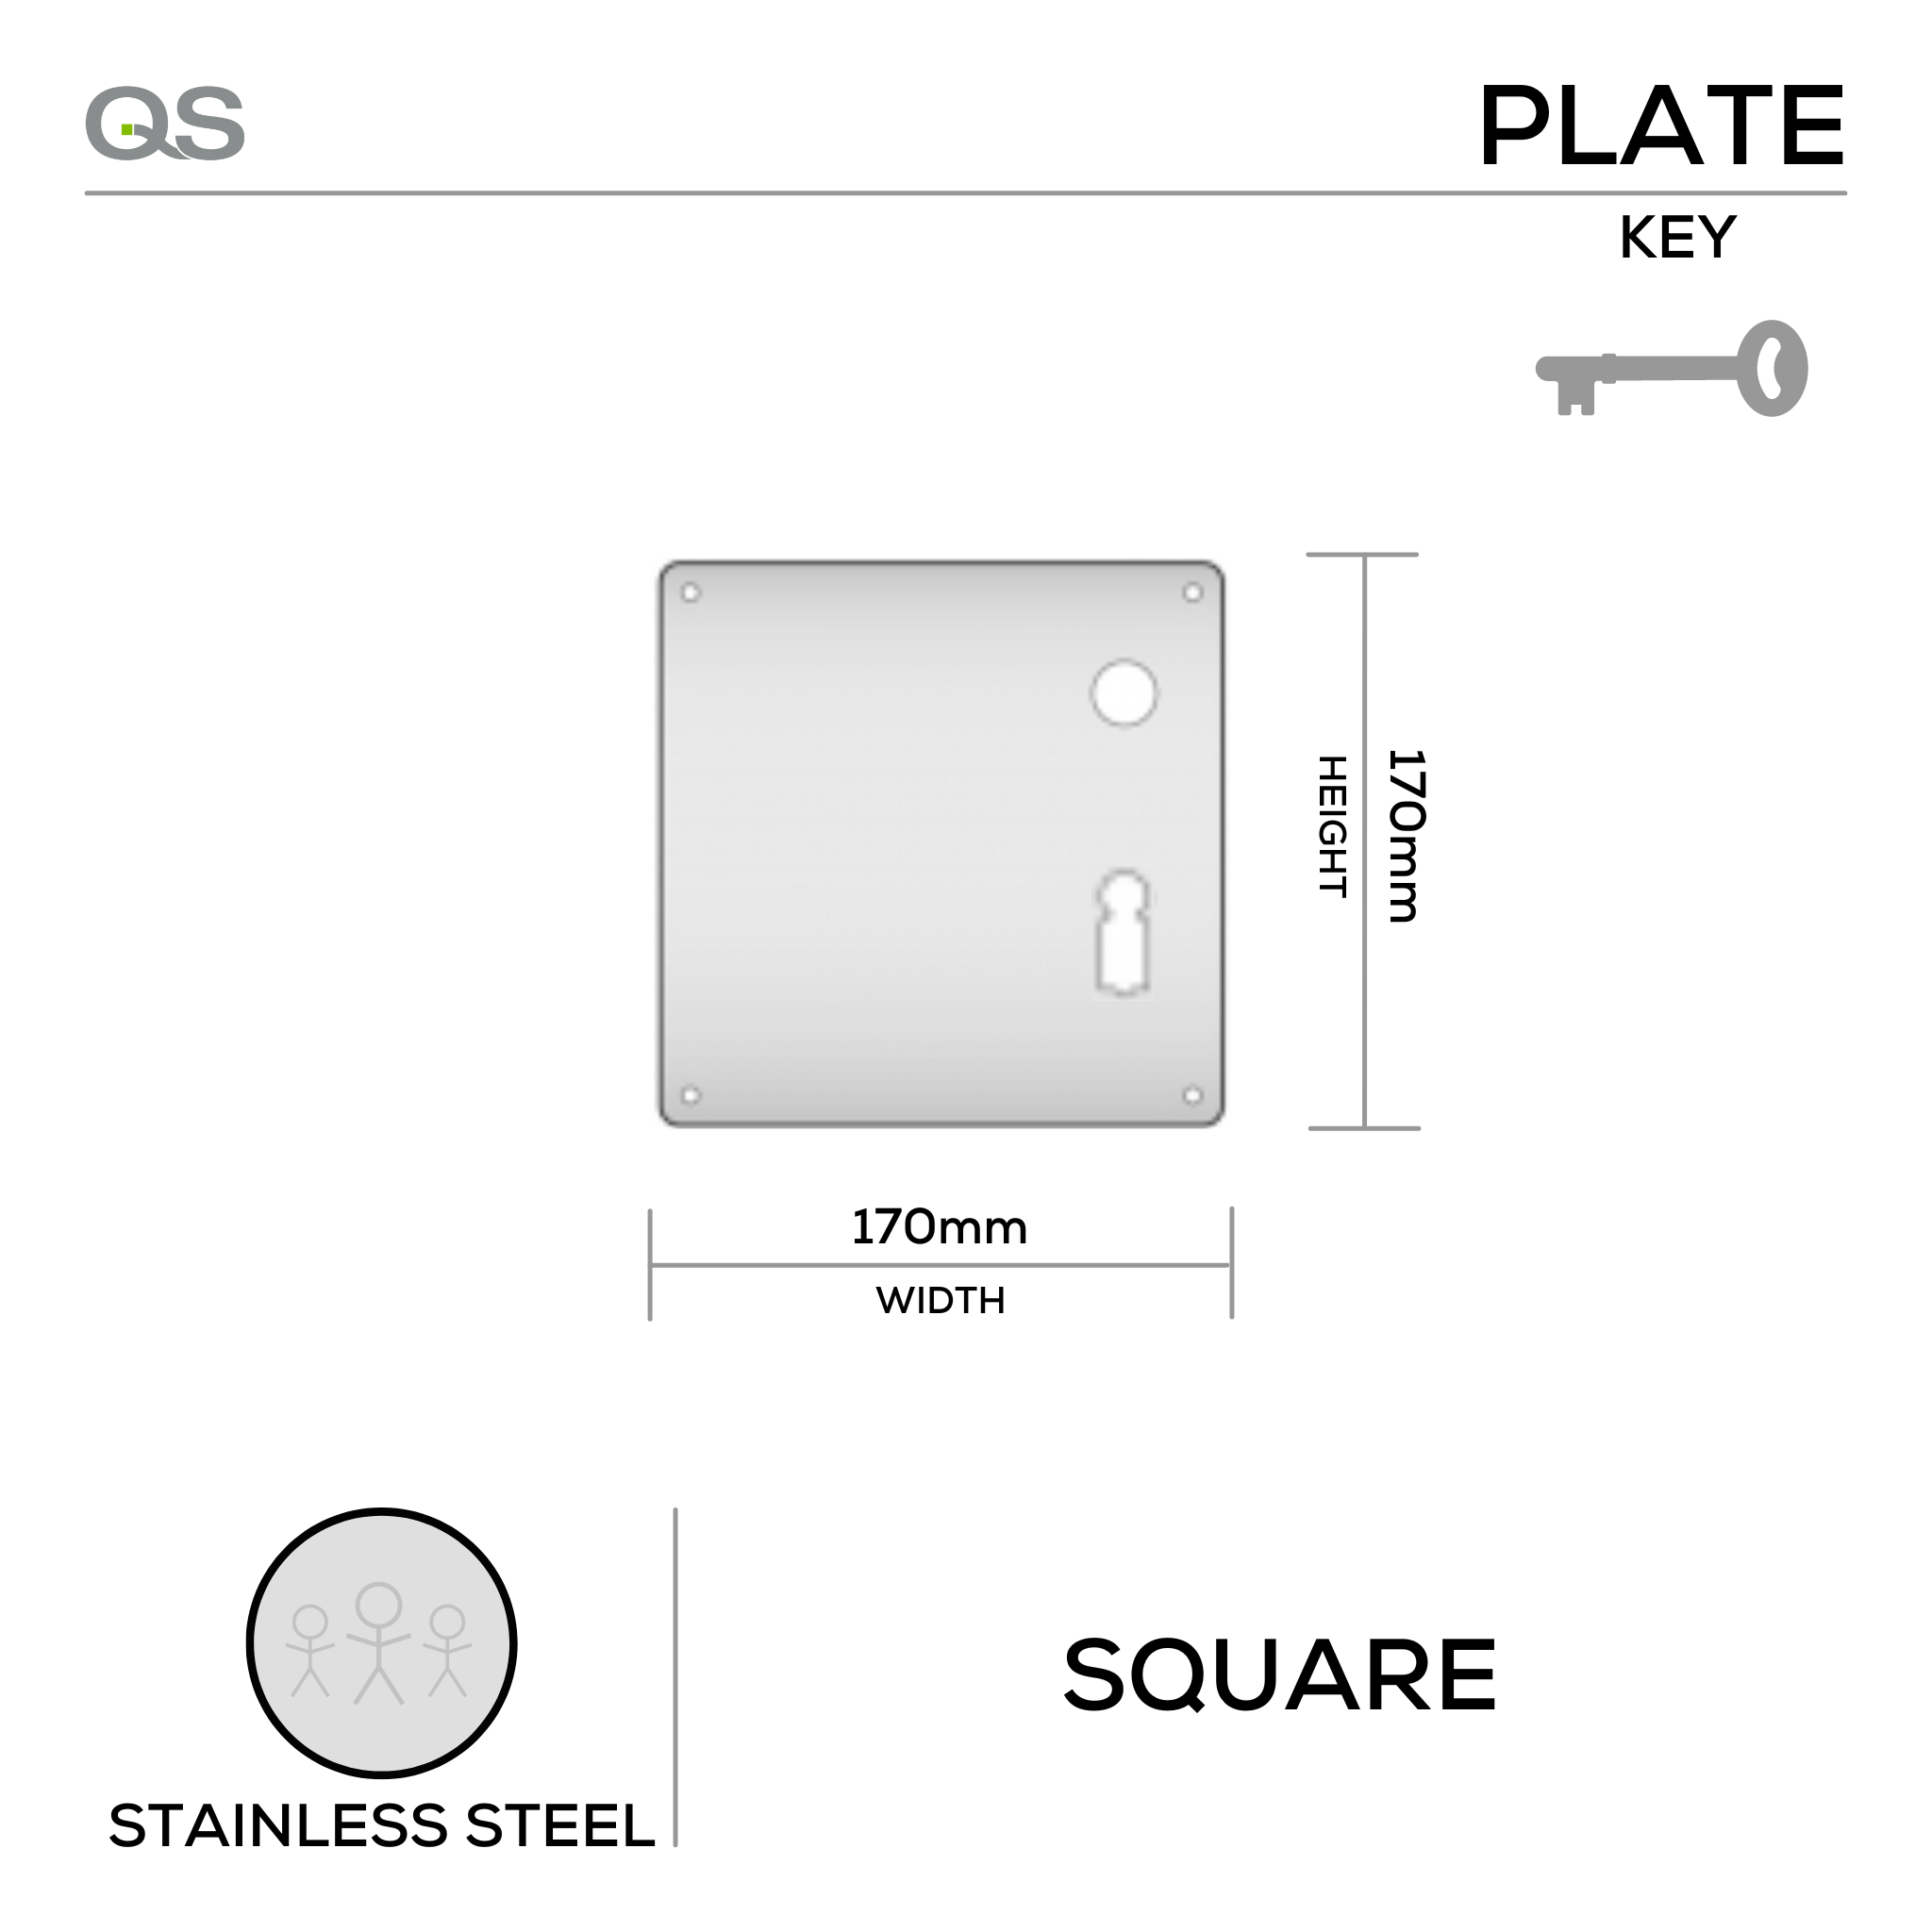 QS4485 KH, Plate, Square, 170mm (l) x 170mm (w), (Price if purchasing a Qs handle at same time), Stainless Steel, QS